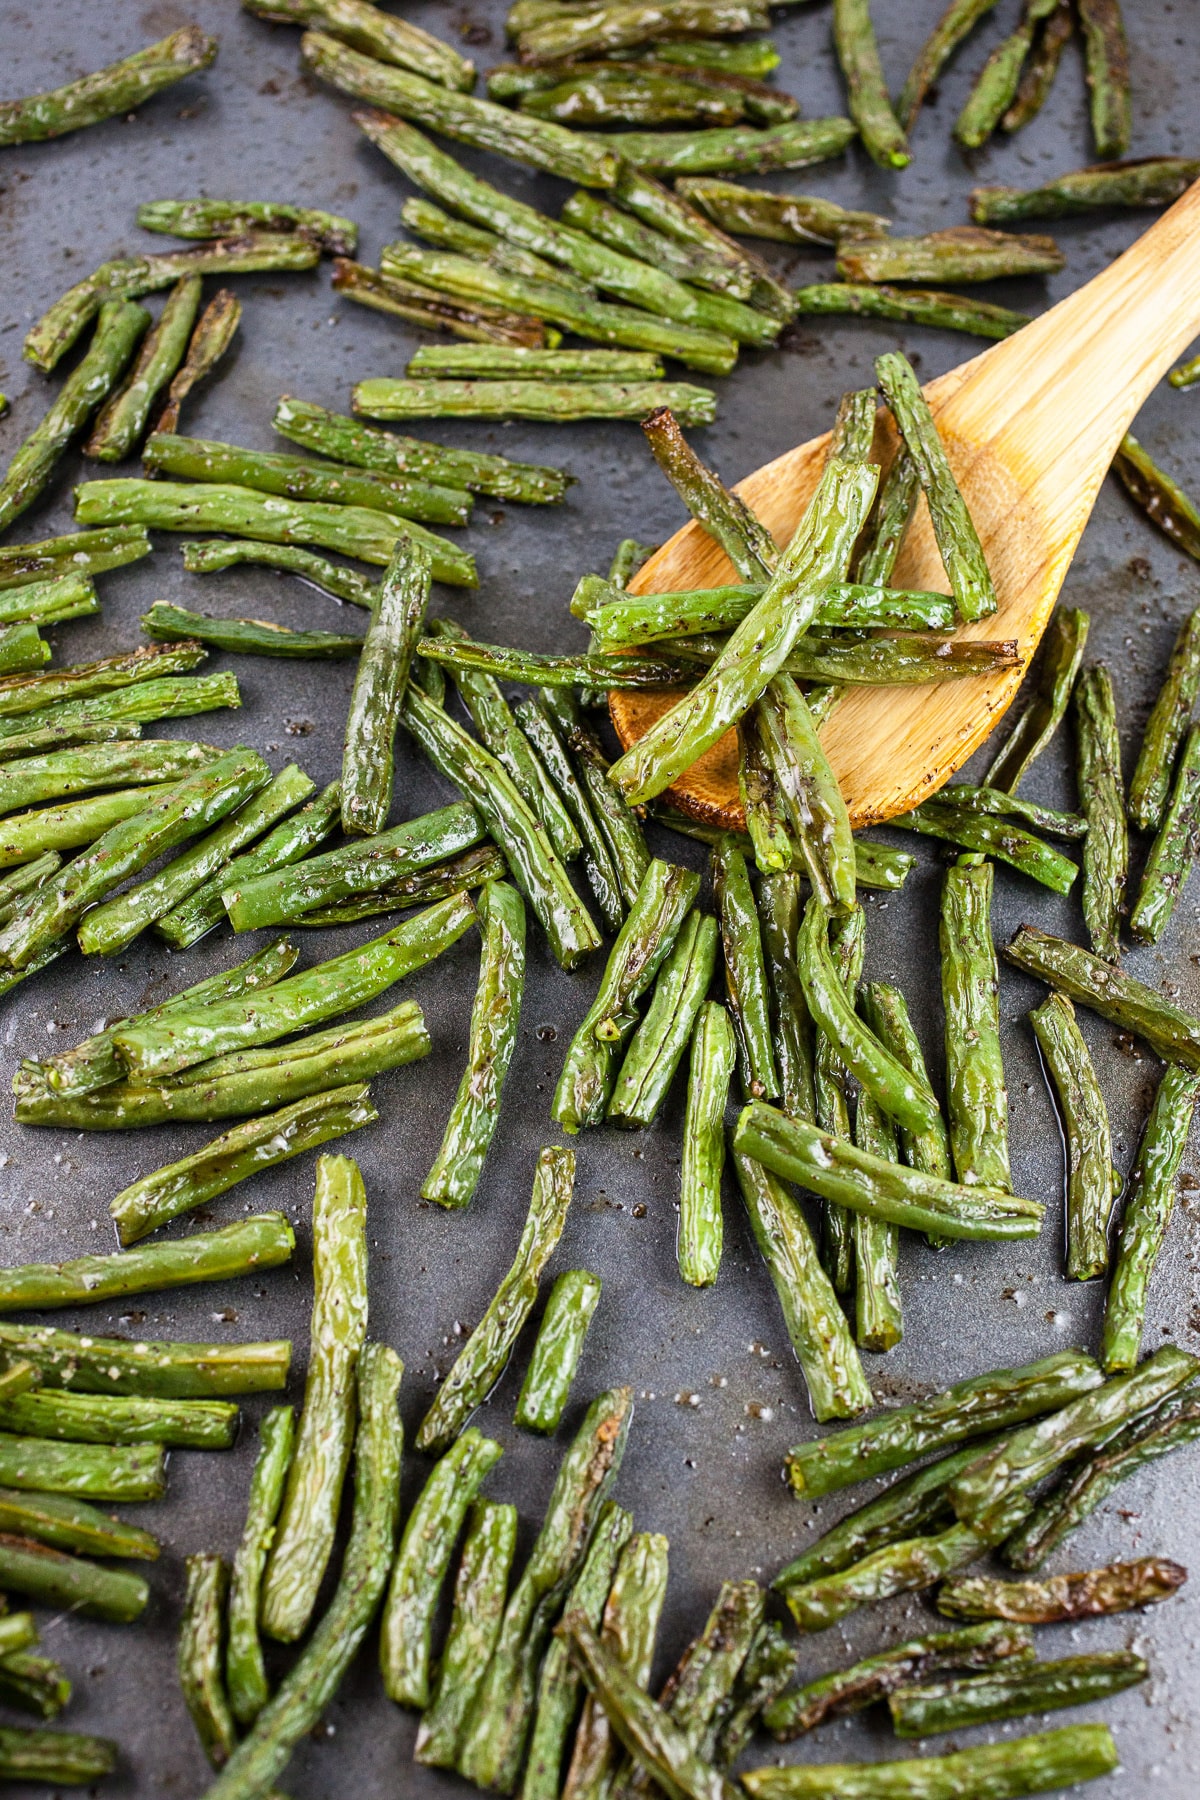 Roasted green beans on baking sheet with wooden spoon.